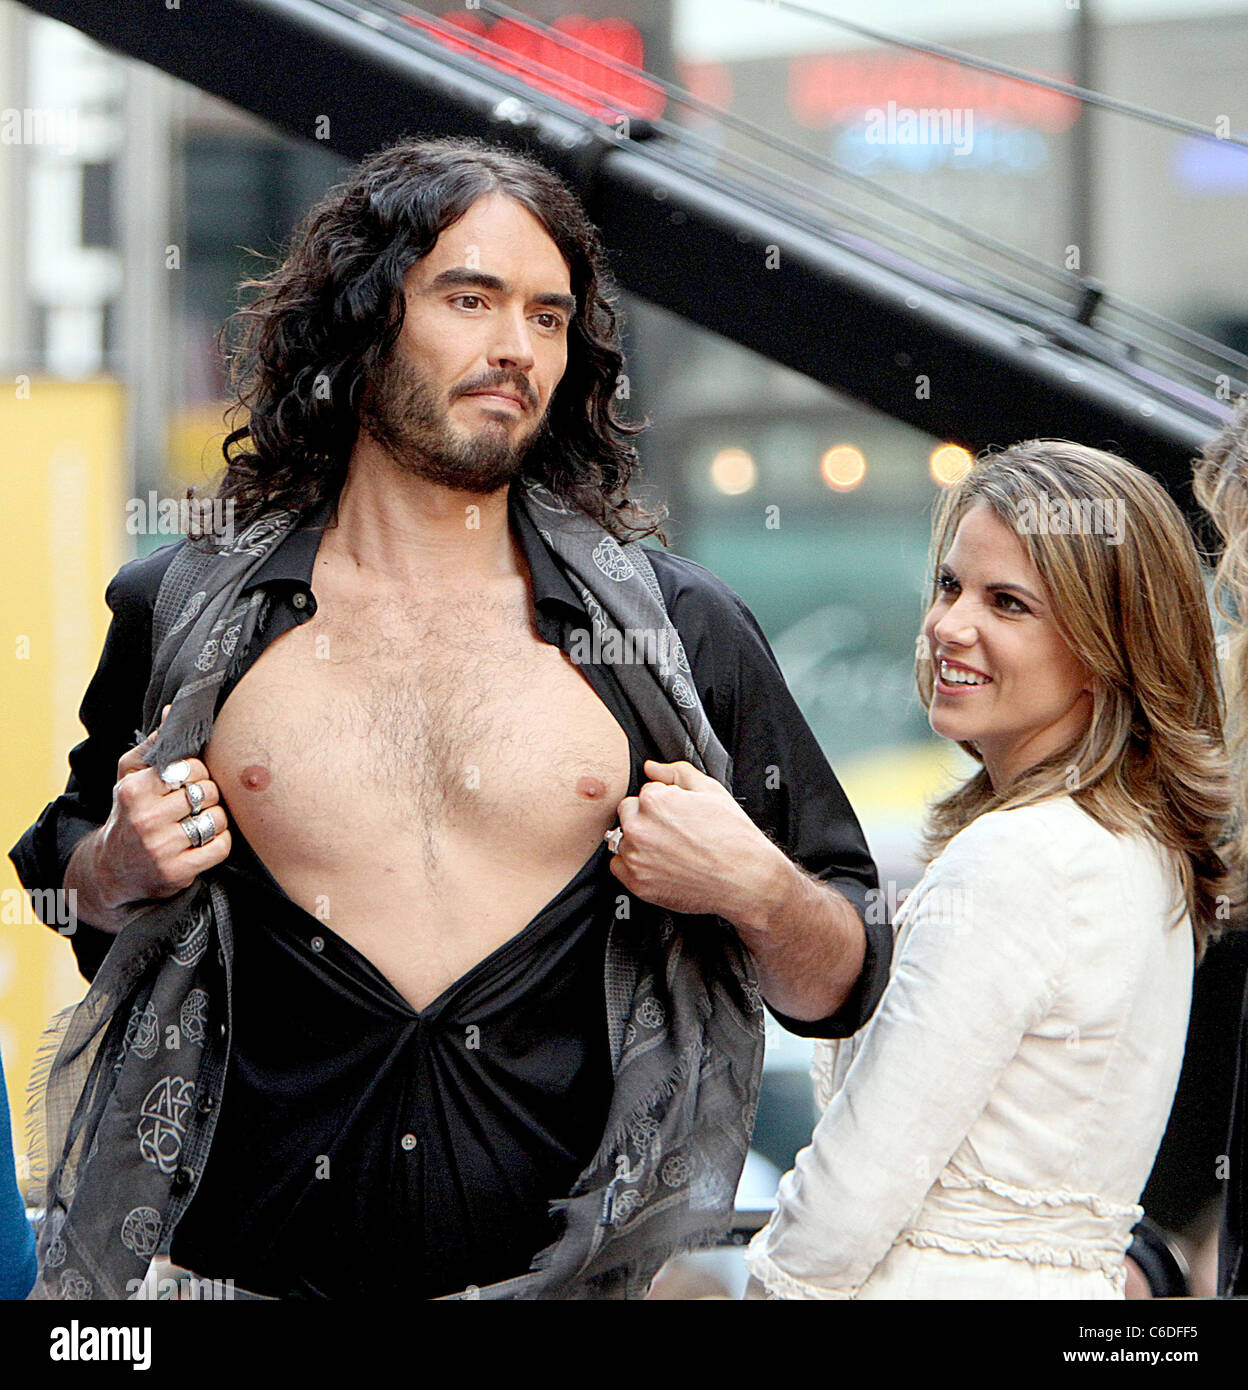 Russell brand nude